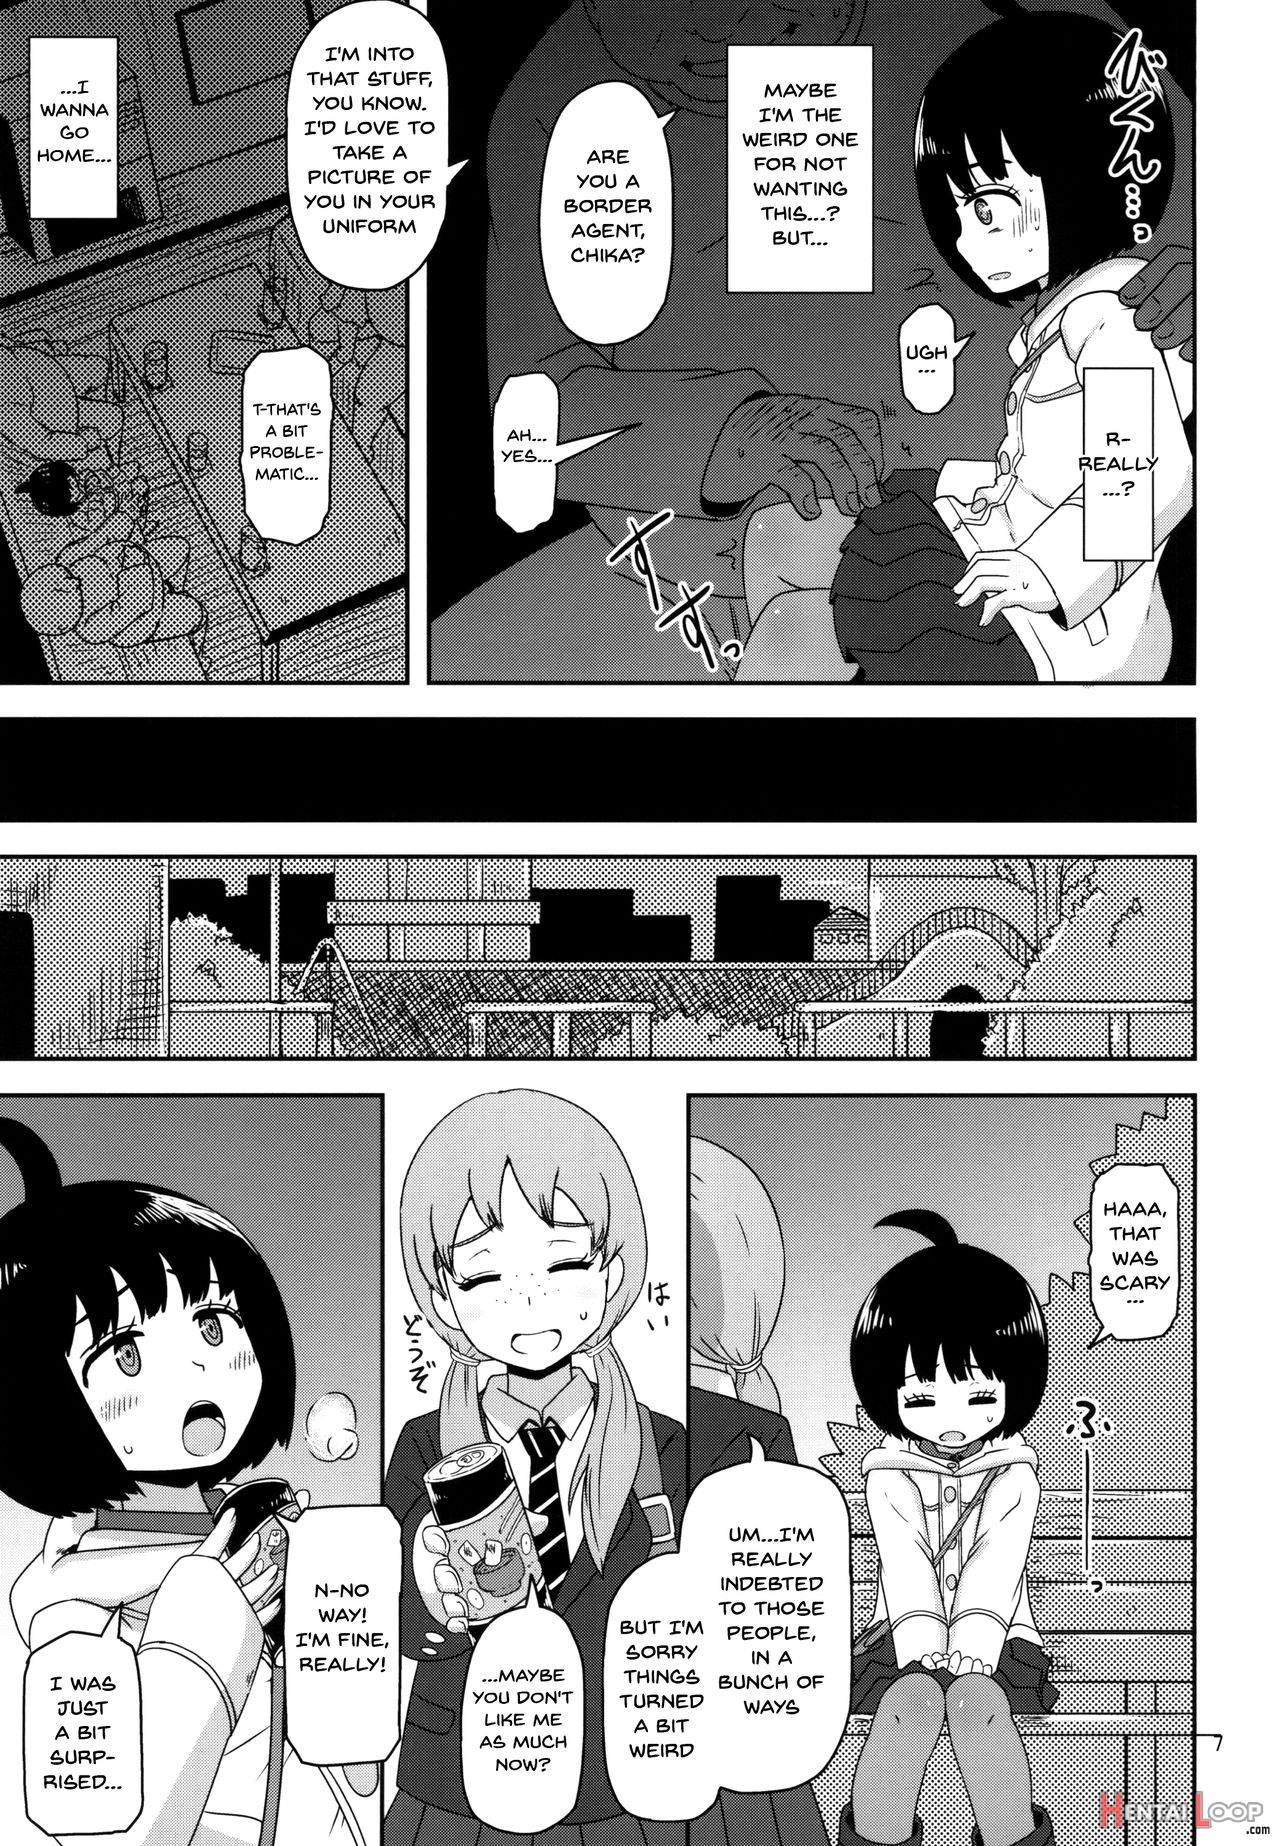 Just As Aoba-chan Says page 6